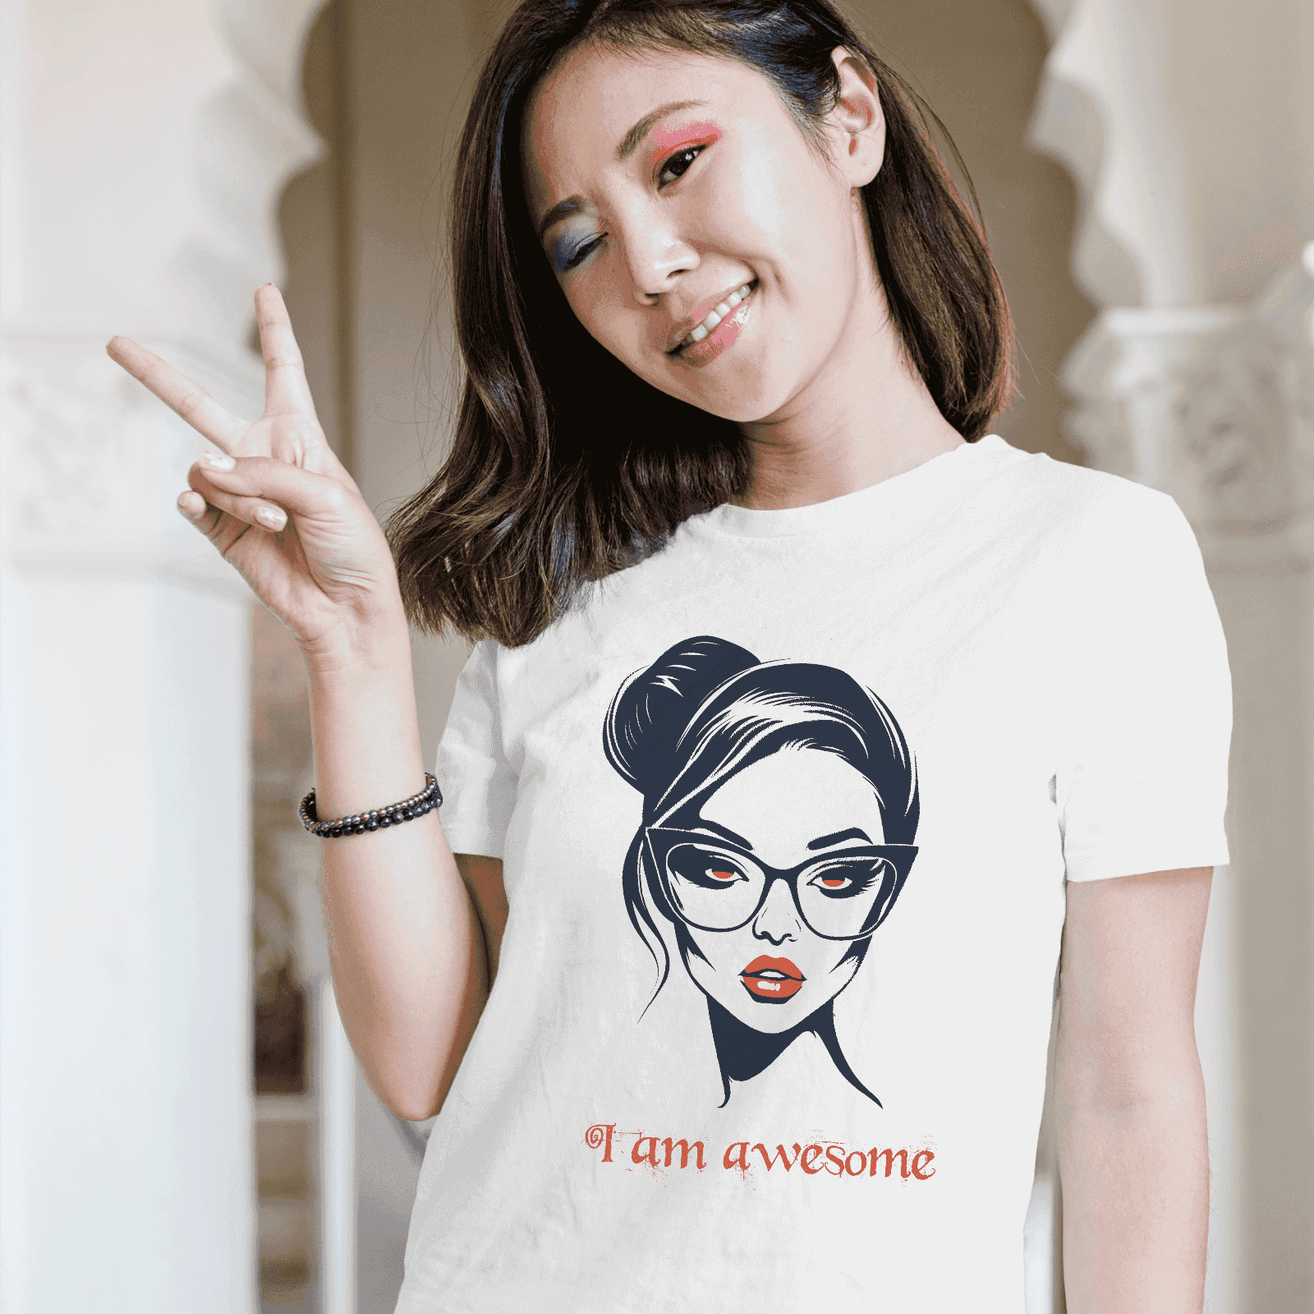 I Am Awesome Women's Empowerment T-Shirt - Own Your Awesomeness